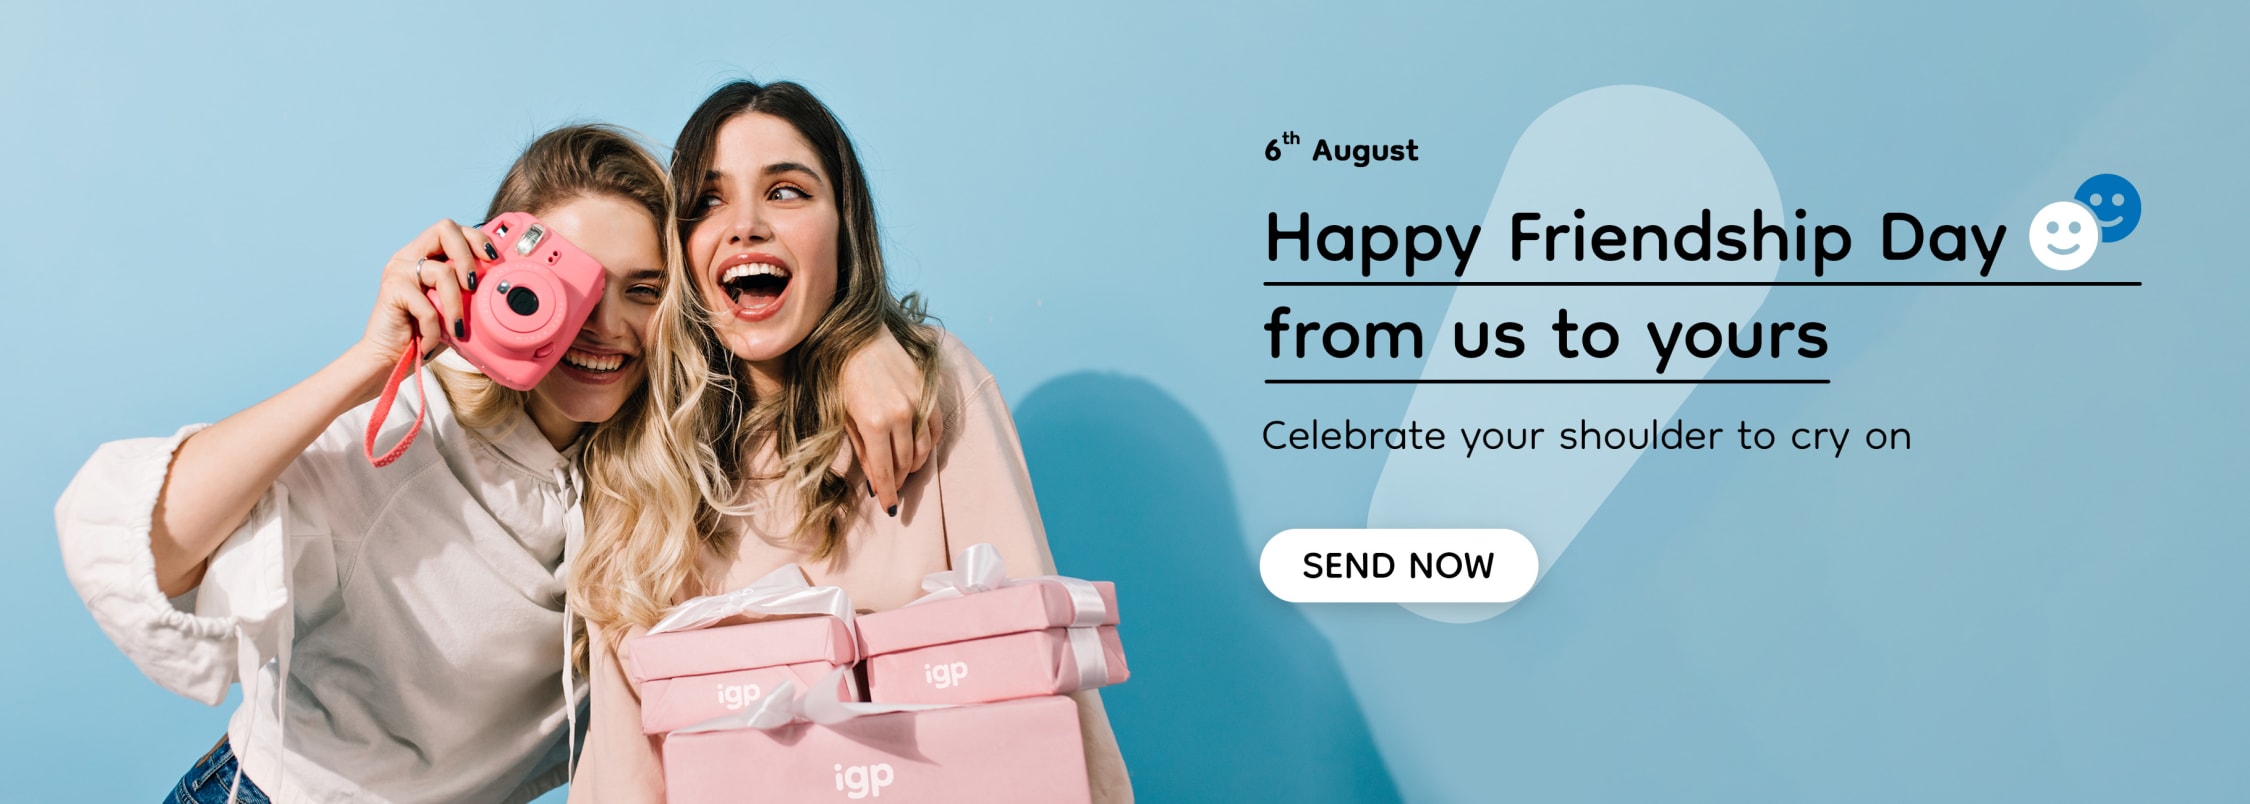 IGP Friendship Day Gifts Offers : Unique Gift Ideas